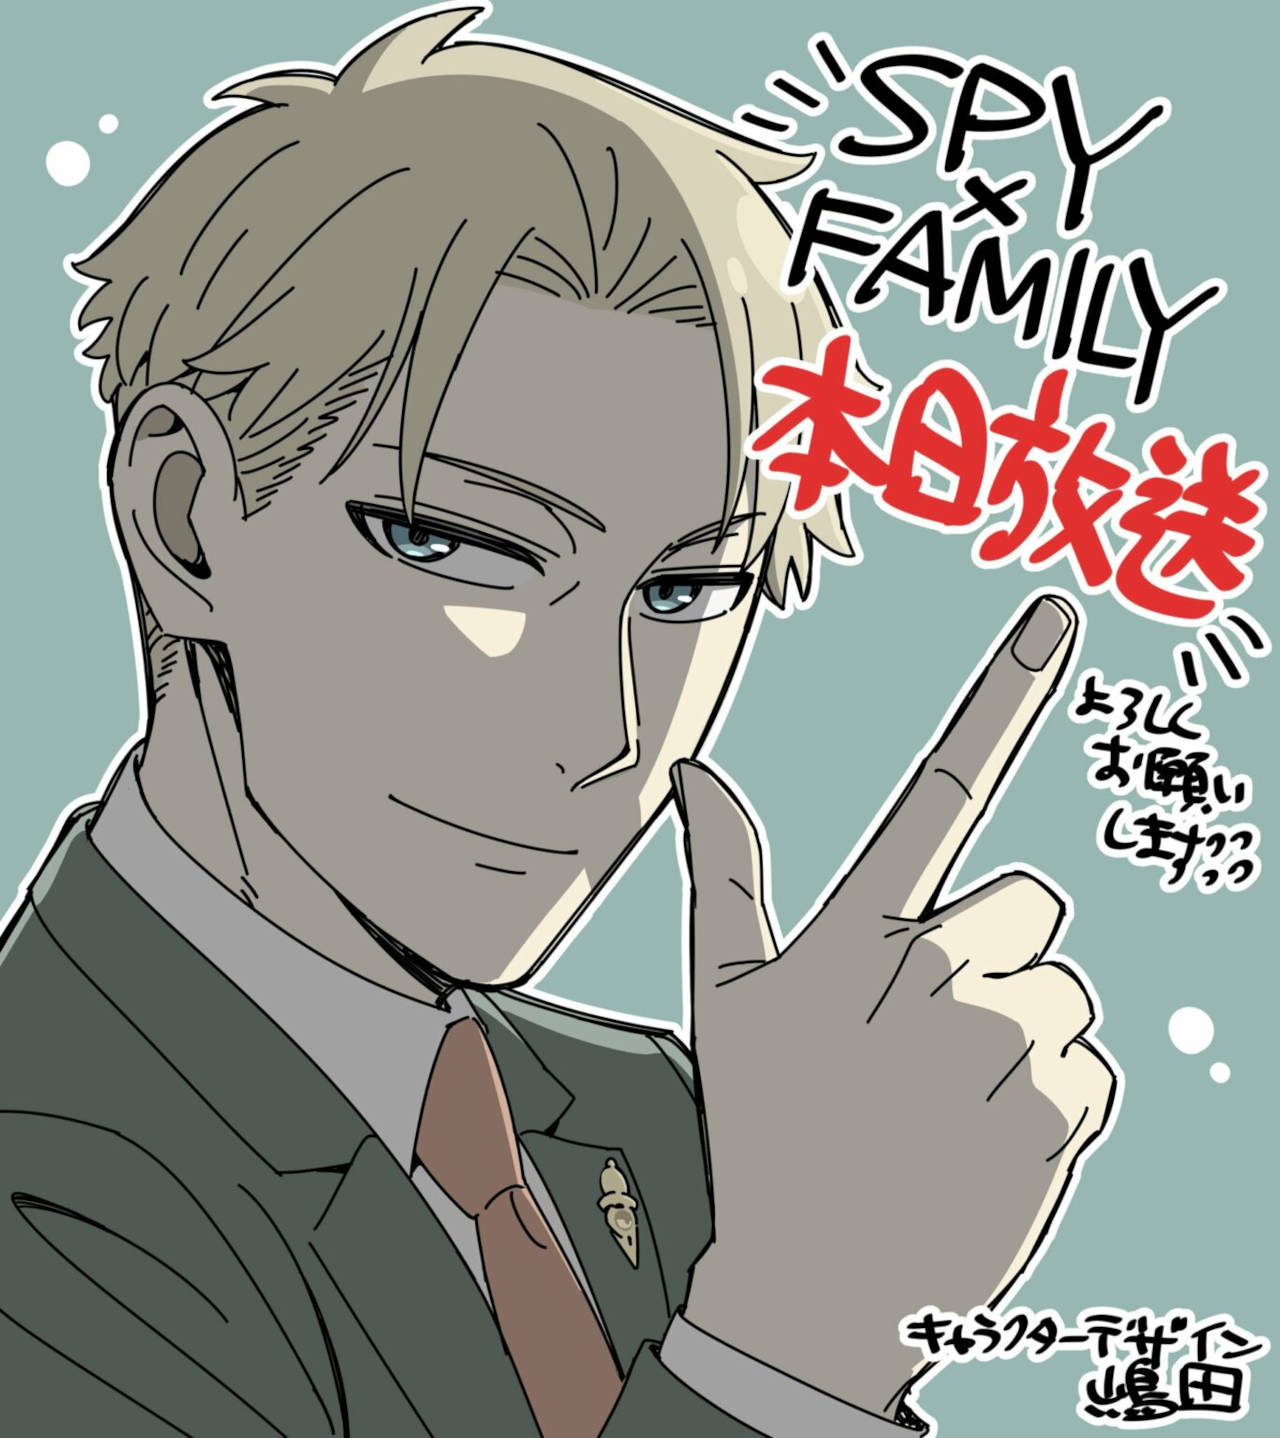 SPY x FAMILY Celebrates Their Comeback With A Beautiful Illustration From Episode 13 